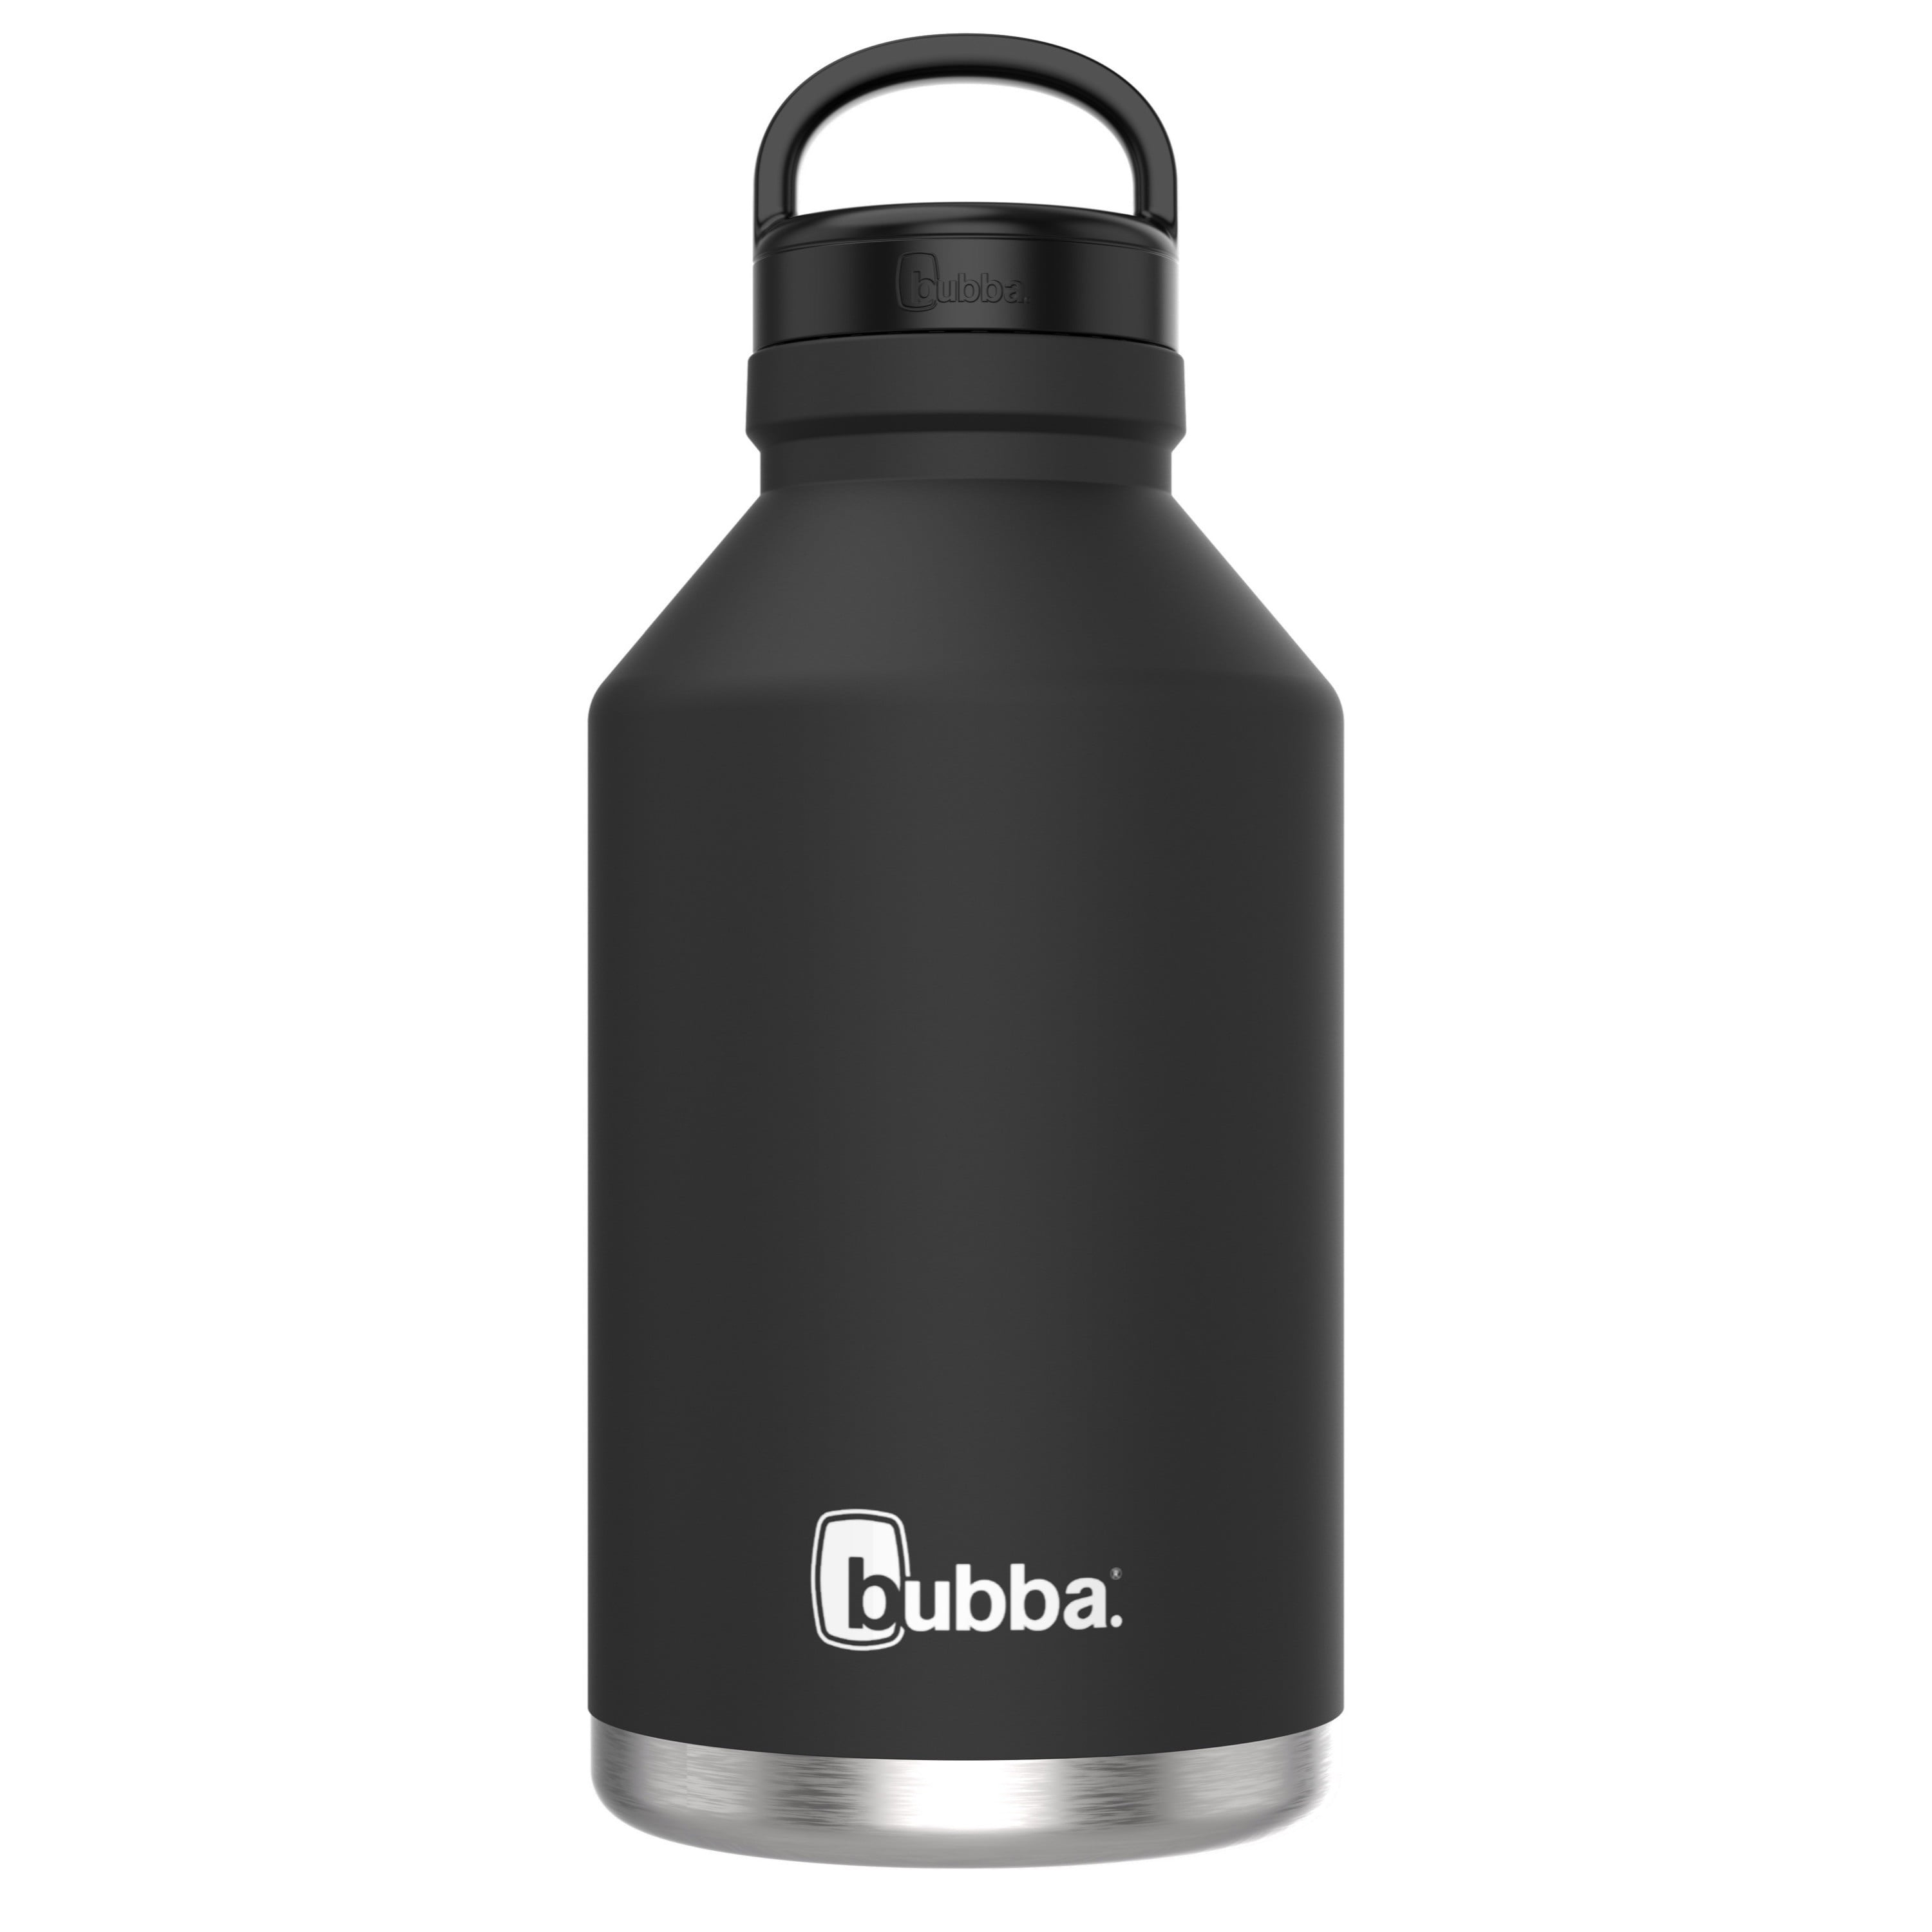 bubba Trailblazer Insulated Stainless Steel Growler with Wide Mouth Lid,in Black, 64 oz., Rubberized